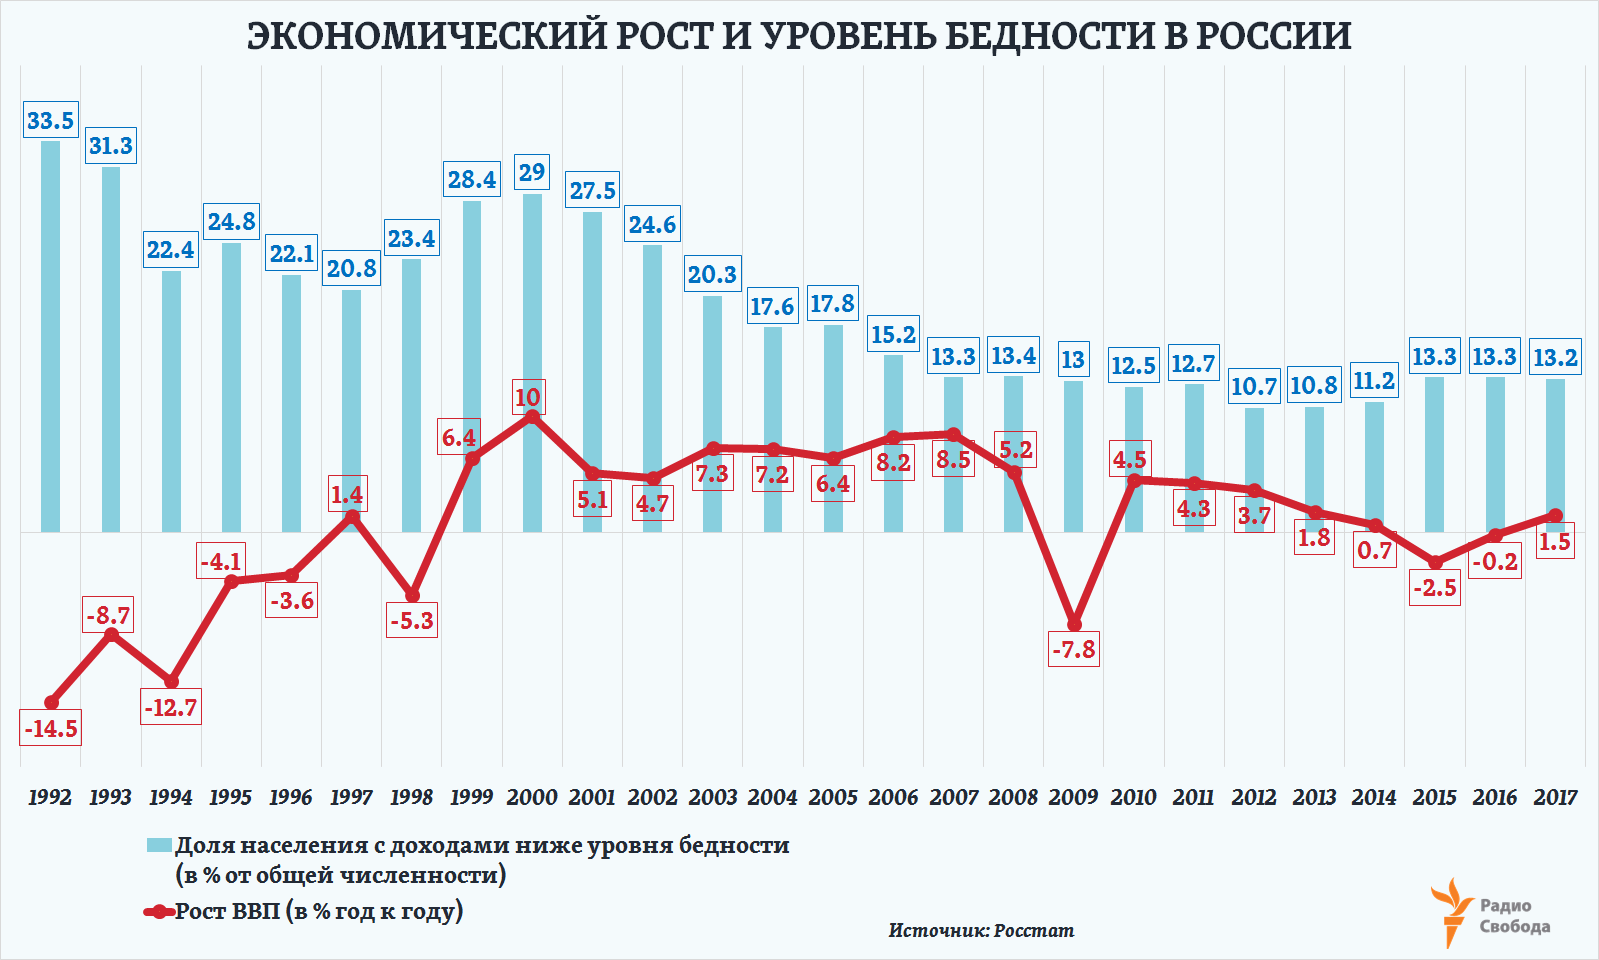 Russia-Factograph-Poverty-GDP Growth-Russia-1992-2017